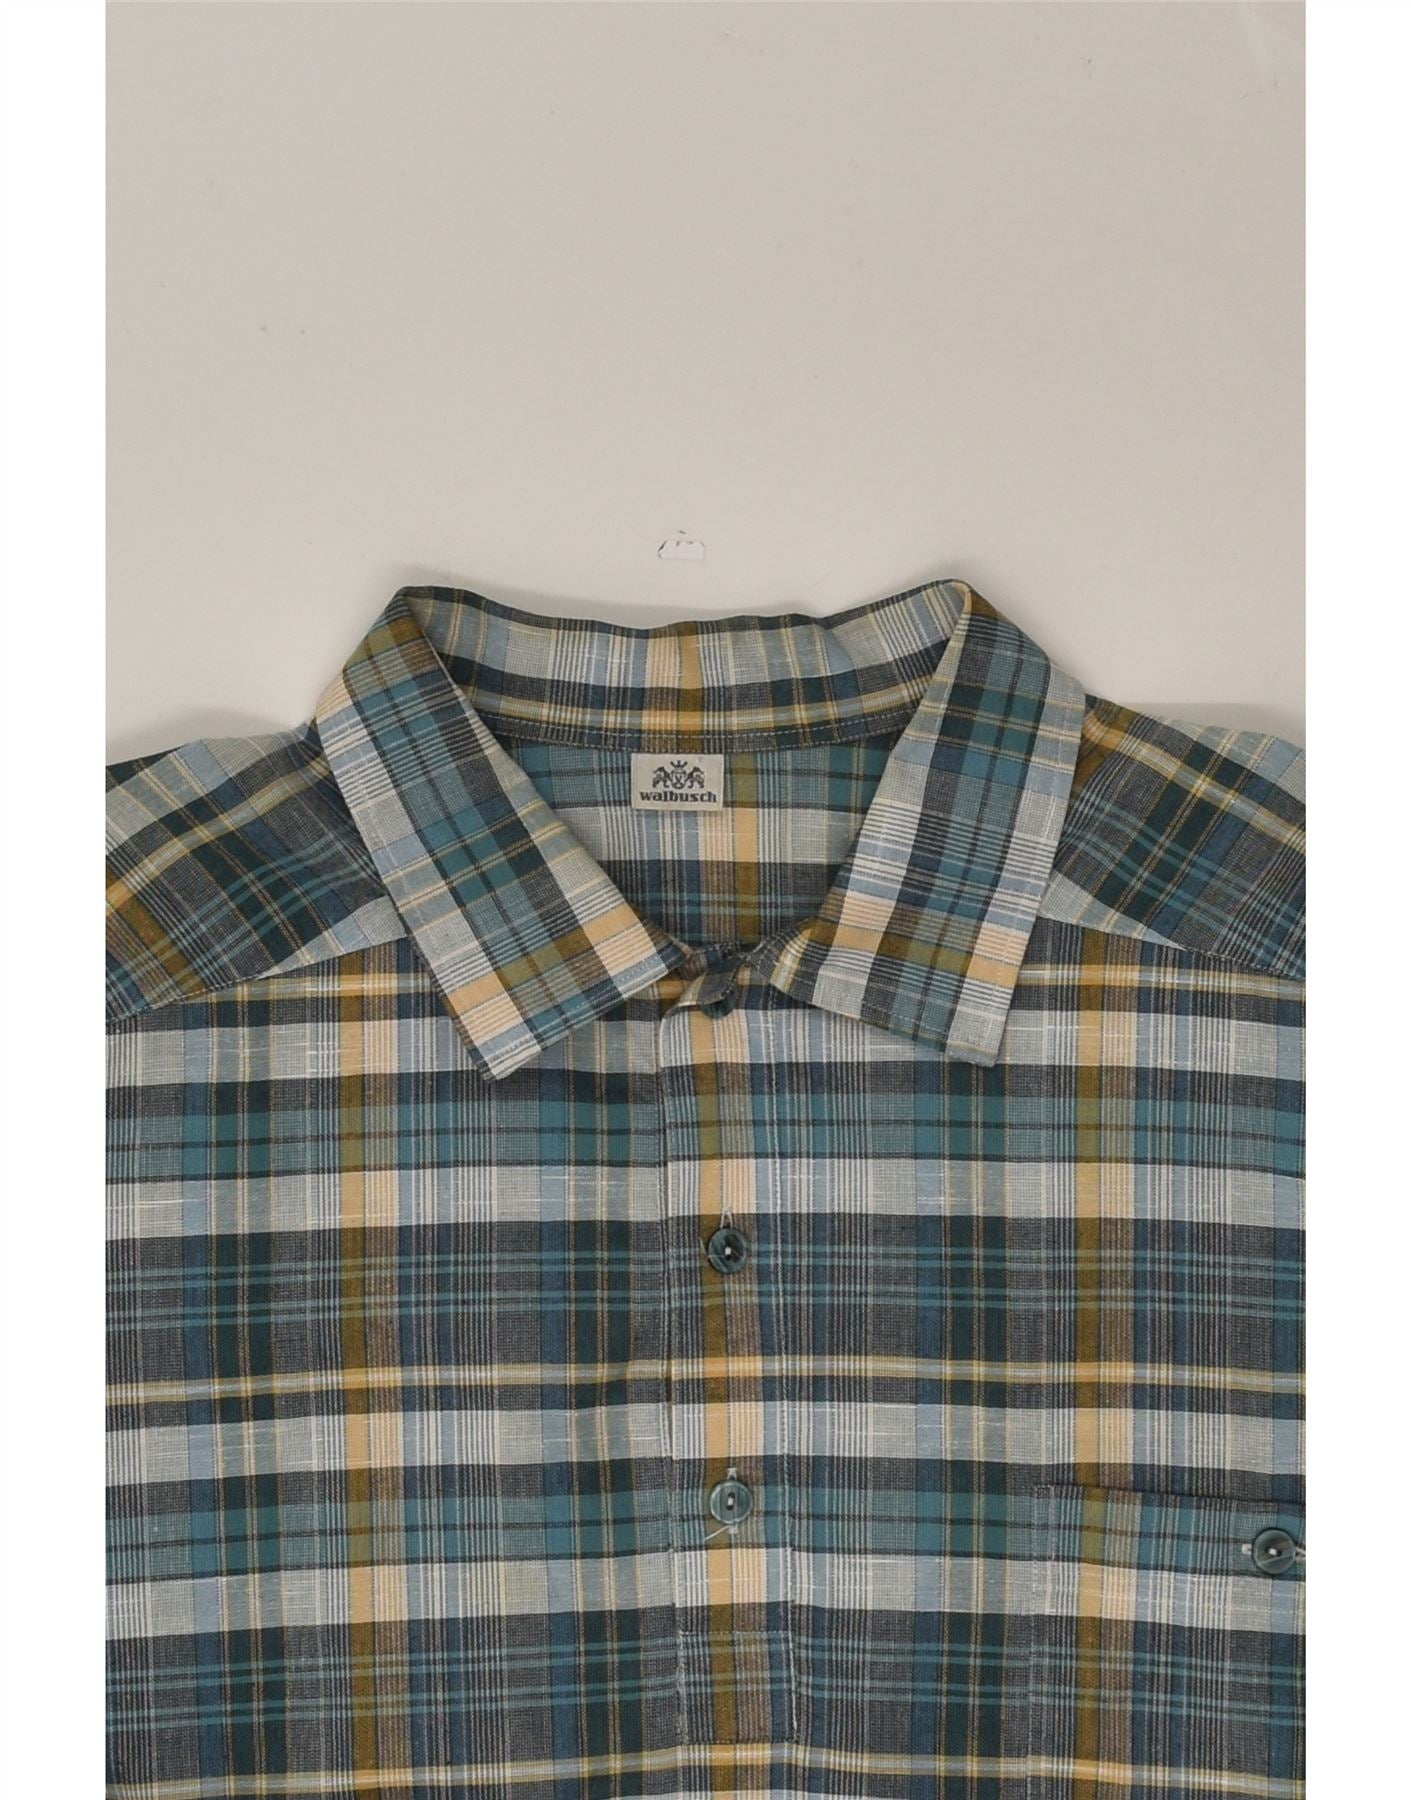 WALBUSCH Mens Pullover Shirt 2XL Grey Check Cotton, Vintage & Second-Hand  Clothing Online